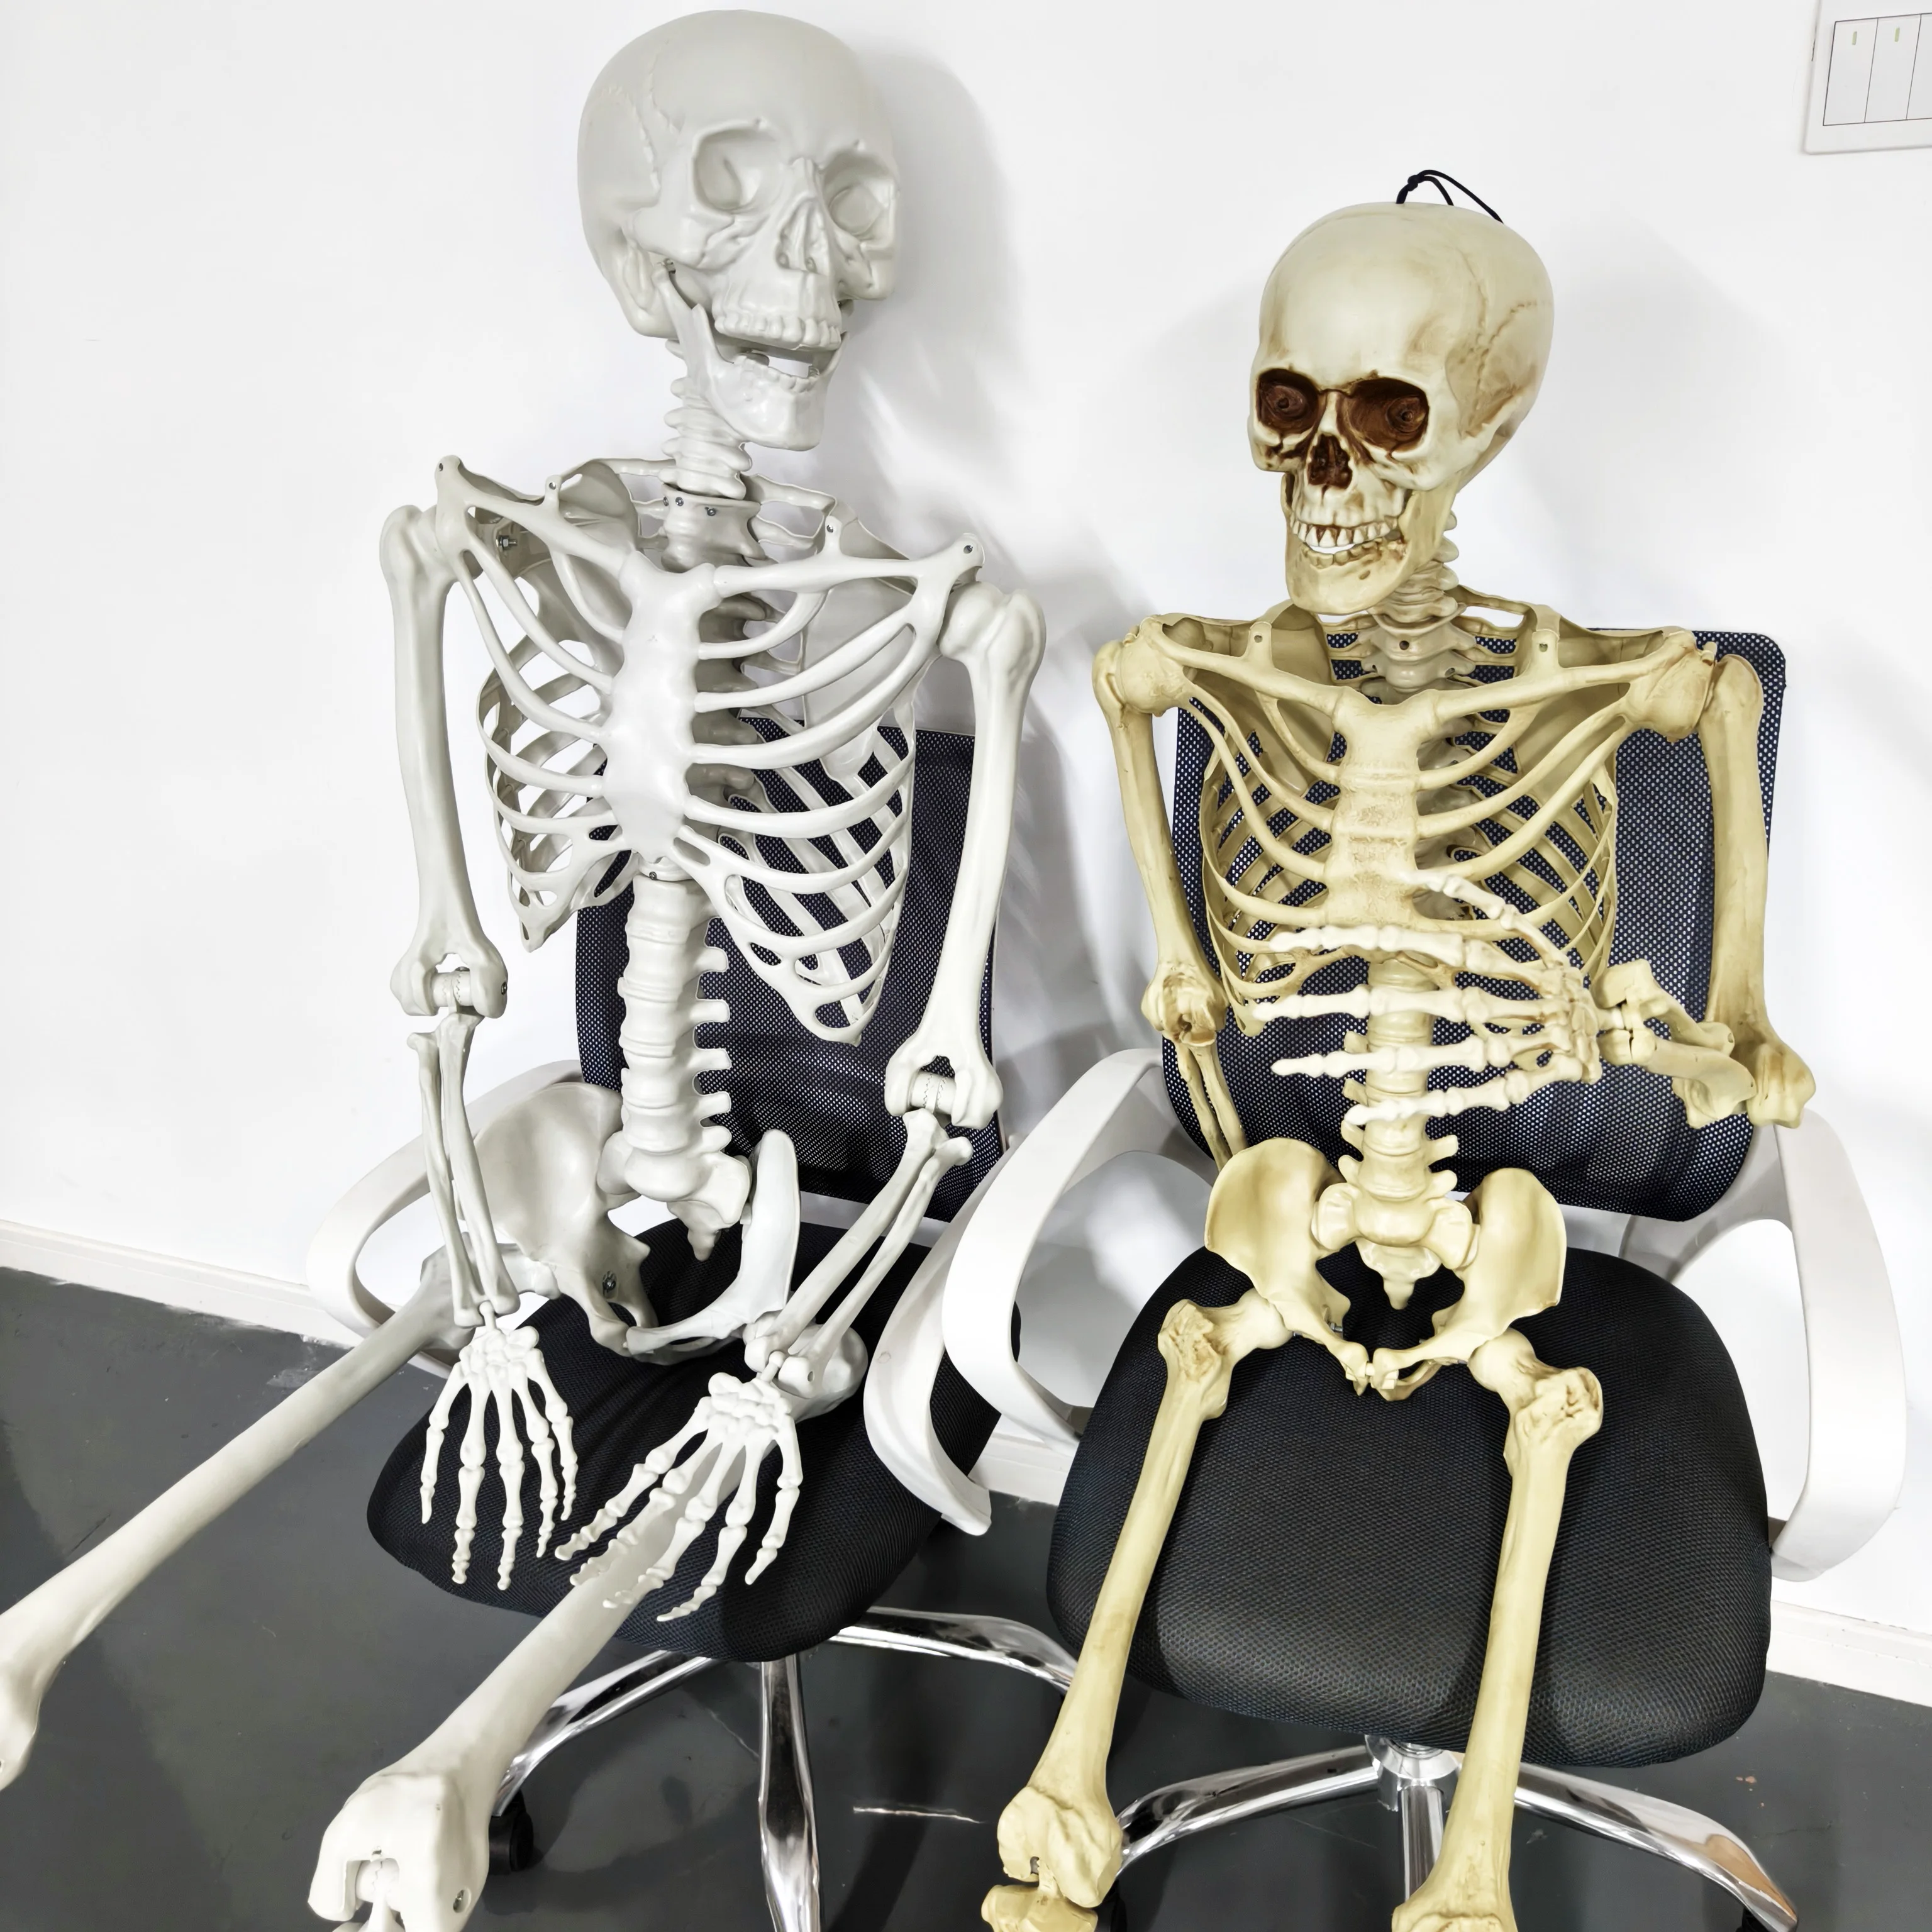 Human Halloween Decorations Props Large Animated Movable Joints High Quality Life Size Skeleton